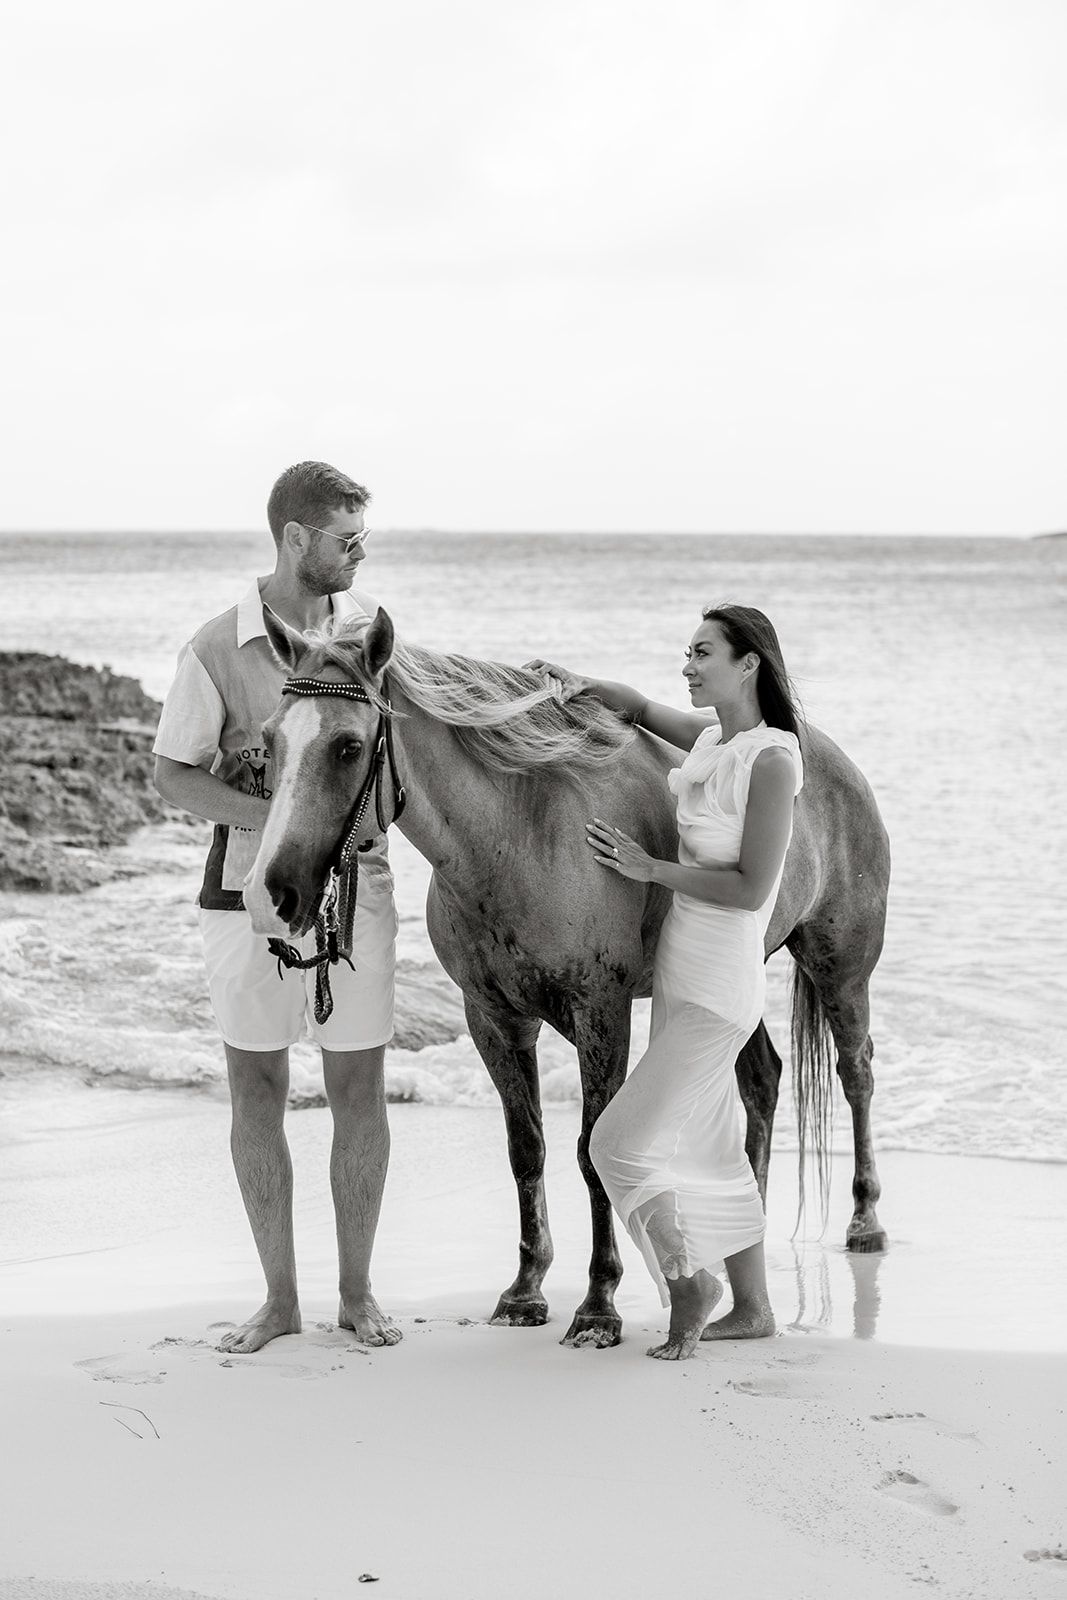 Man and woman stand next to horse on beach of Anguilla